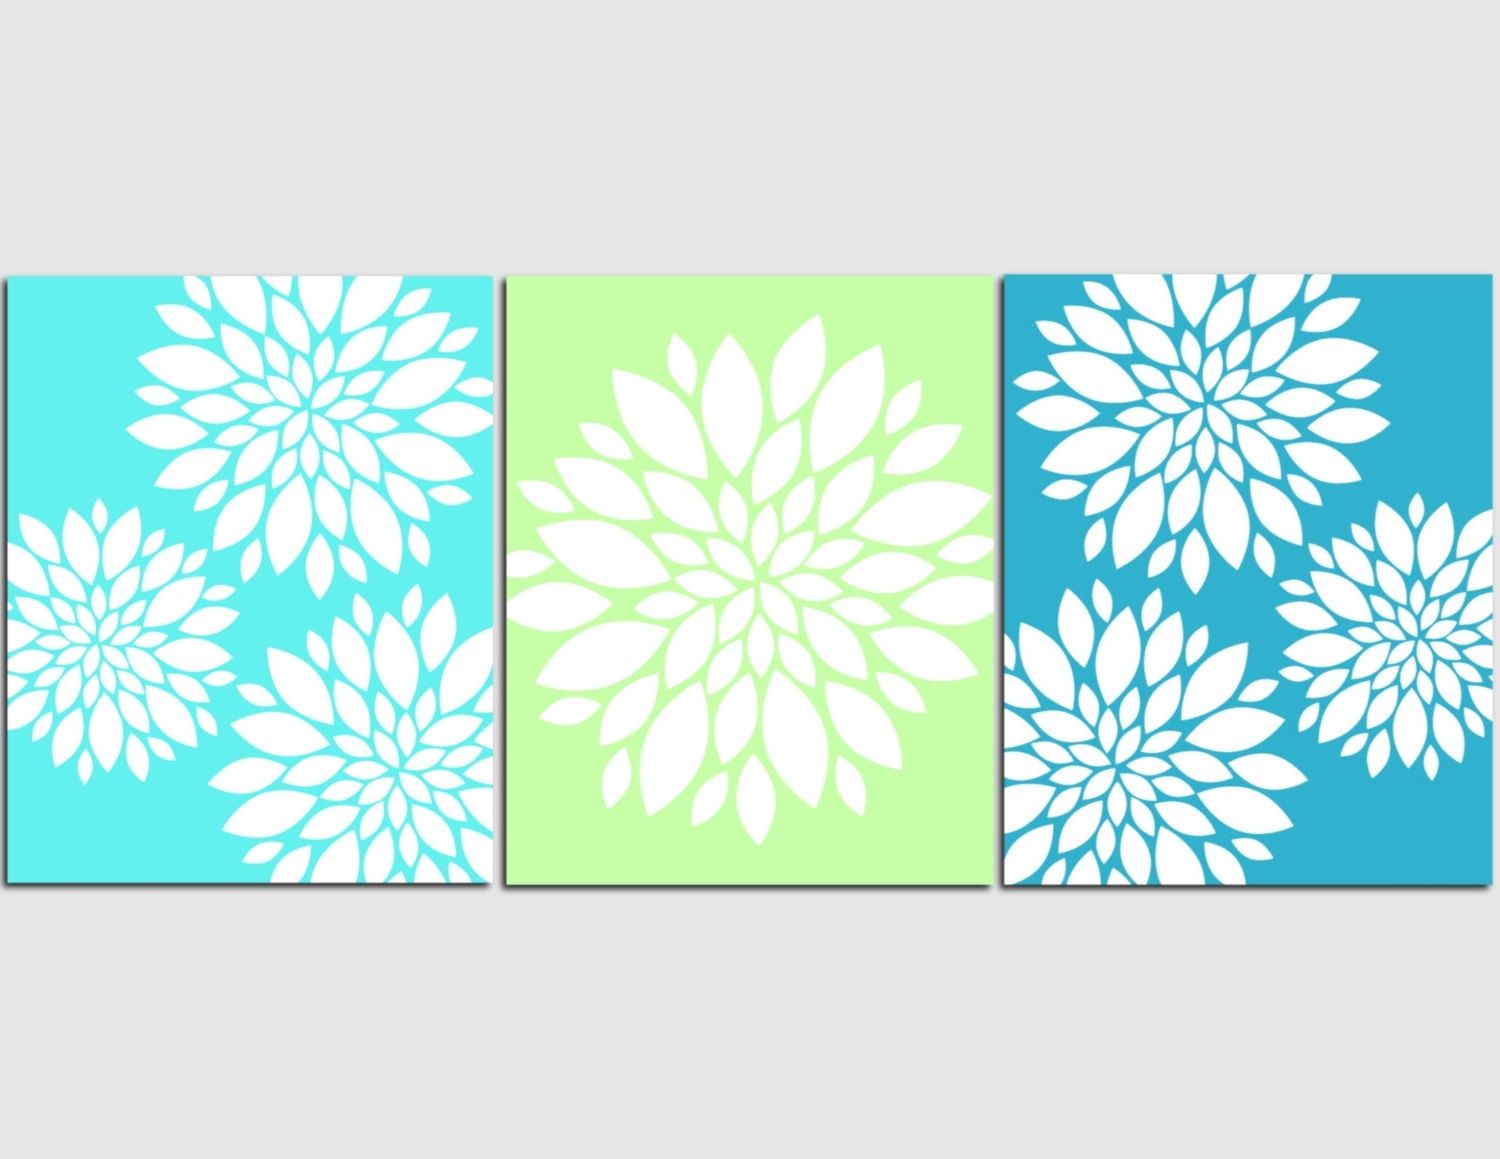 Most Current Wall Art For Green Walls Inside Aqua Teal Lime Green Wall Art Home Decor Flower Burst, Floral (View 10 of 15)